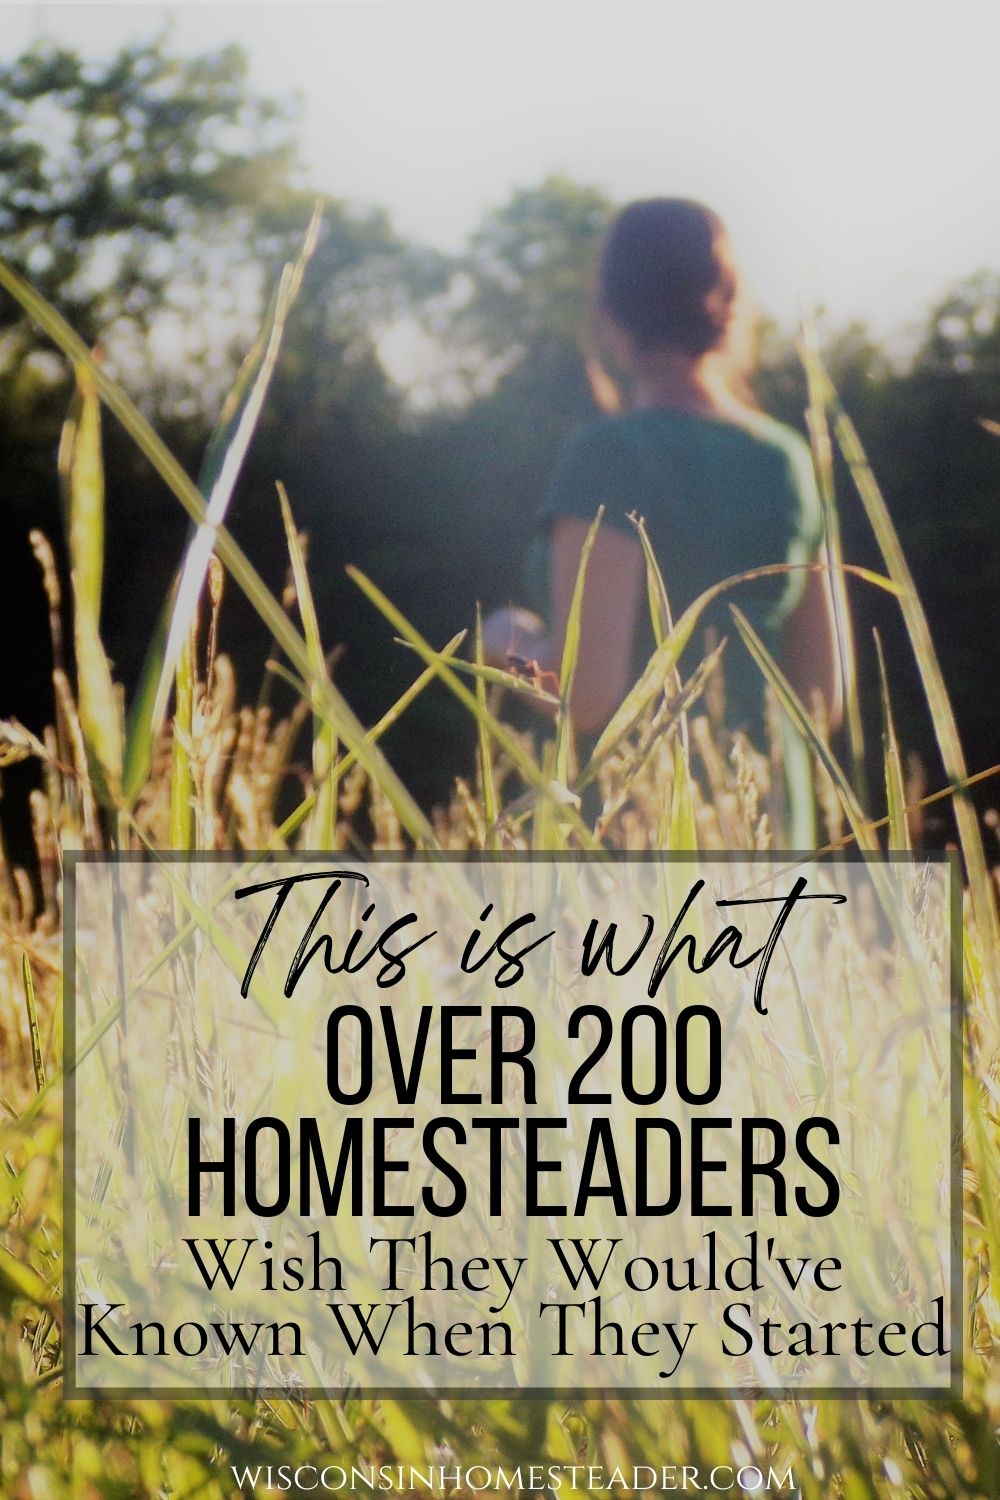 What 200 Homesteaders Wish They Would've Known When They Started